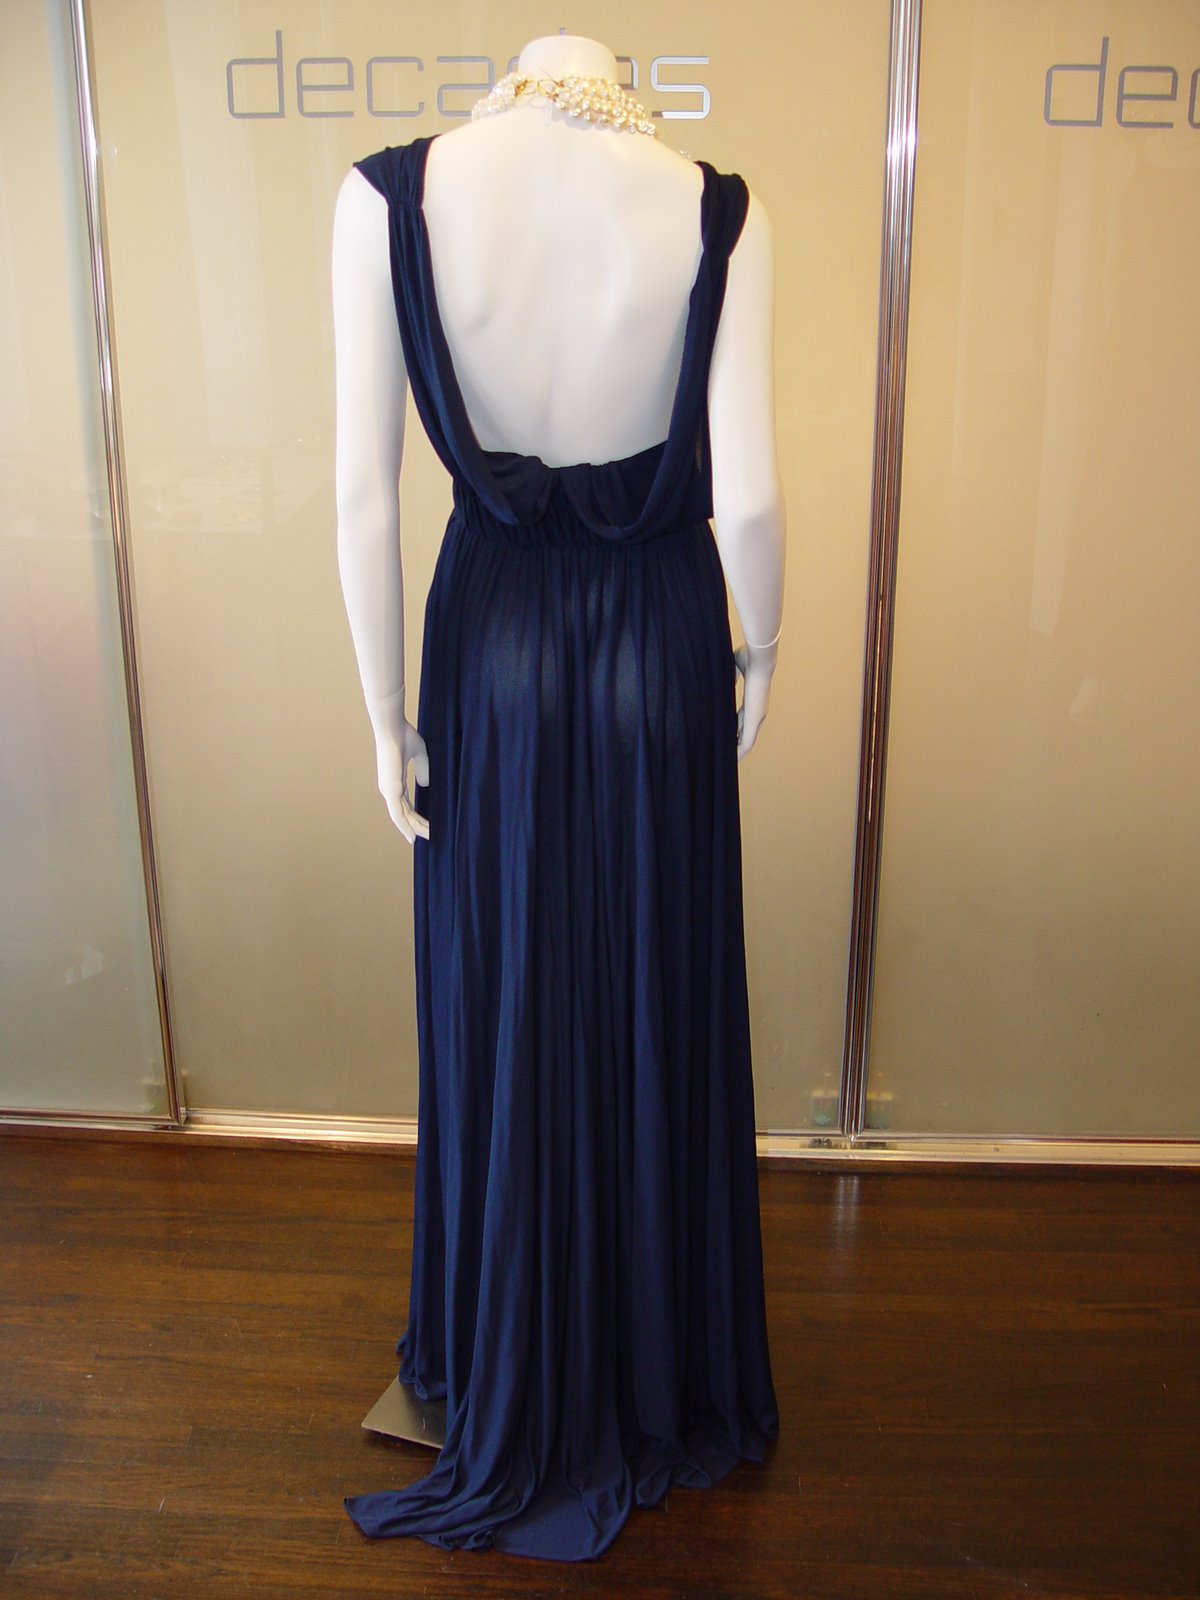 [YSL+RIVE+GAUCHE+MIDNIGHT+BLUE+JERSEY+DEEP+PLUNGE+GOWN+WITH+OPEN+BACK+NARROW+GATHERED+WAIST+C+70S+CONTEMPORARY+SIZE+FOUR+WITH+SMALL+WAIST.JPG+(1).JPG]